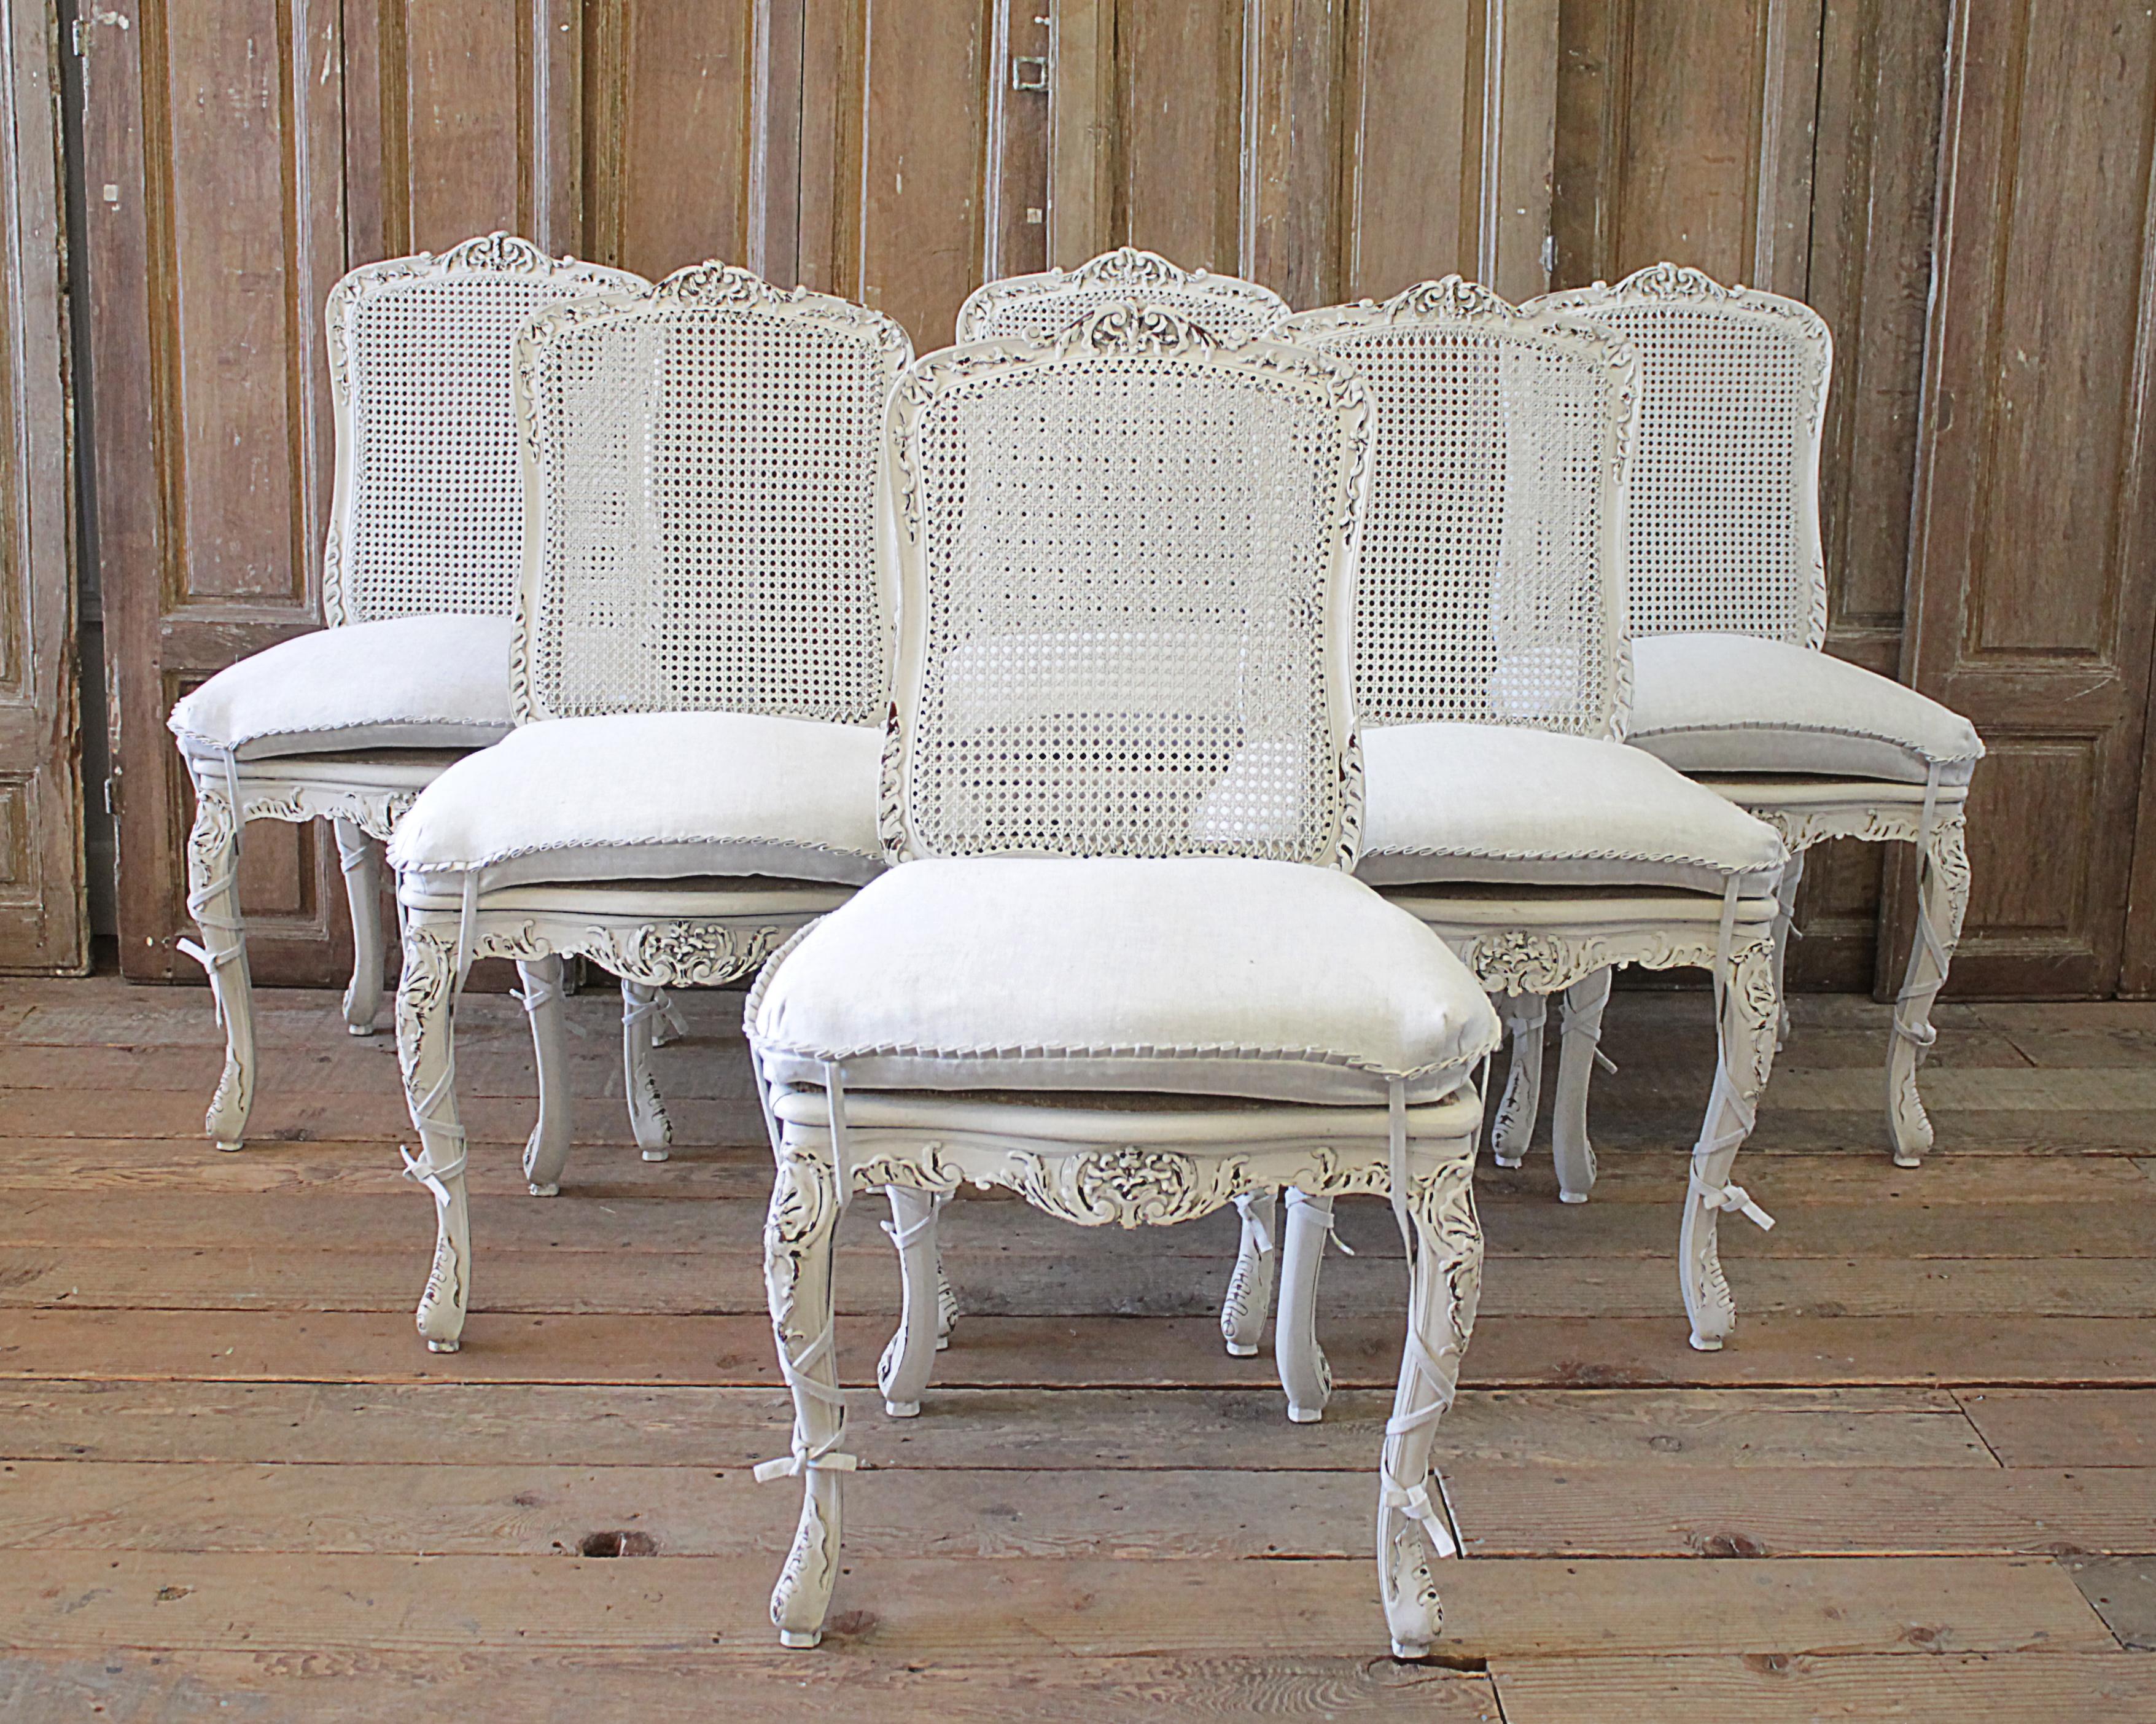 Set of 4 French country painted cane back dining chairs.
Painted in our oyster white finish, with subtle distressed edges, and finished with an antique patina. We customized these with a linen cushion with ruffle edges, and ballet tie legs. 100%